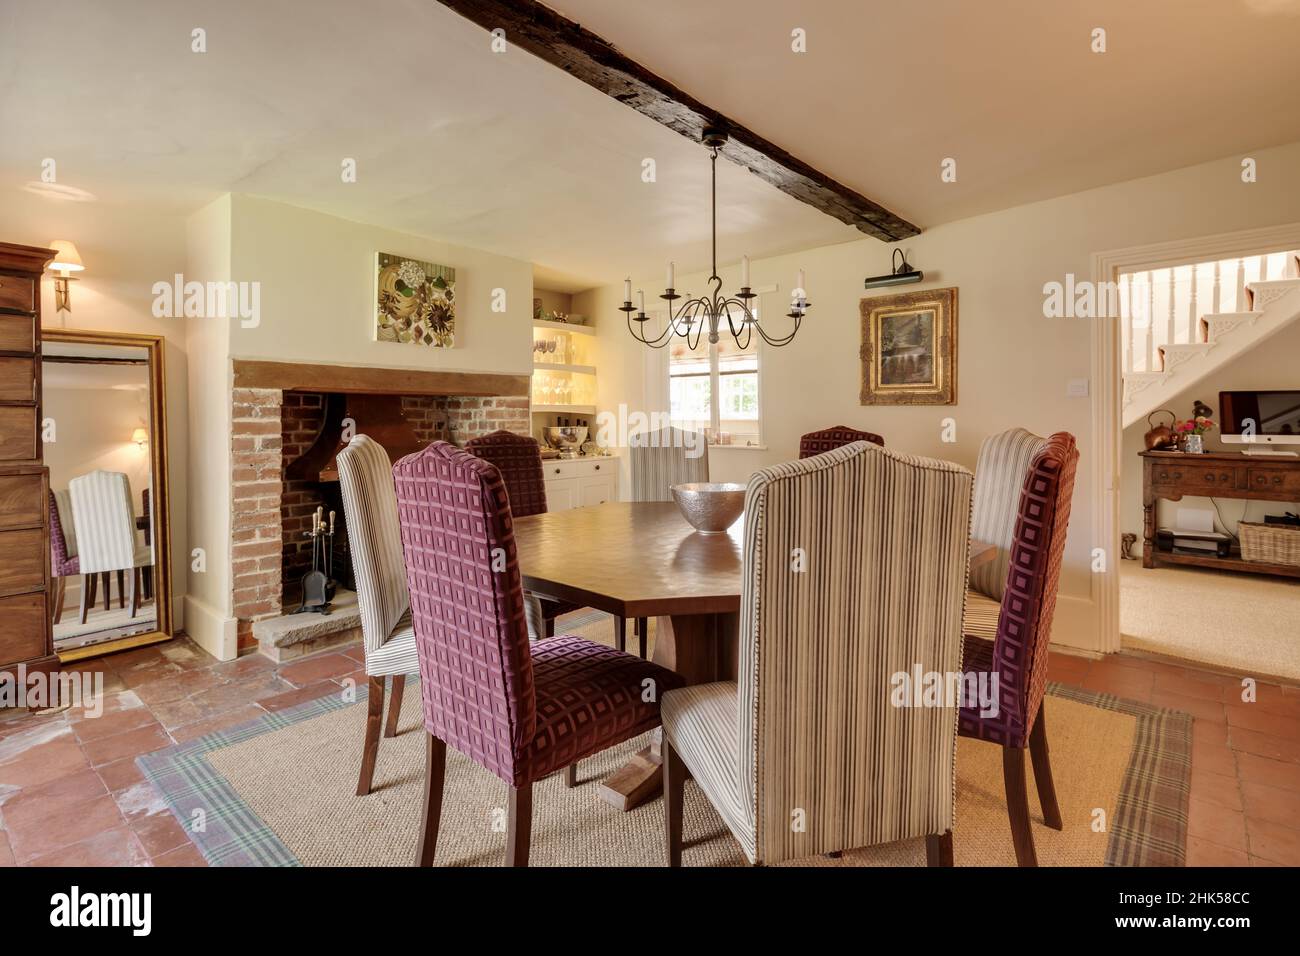 Linton, Cambridgeshire - August 31 2017: Dining room with table and chairs within traditional old home including original brick fireplace. Stock Photo